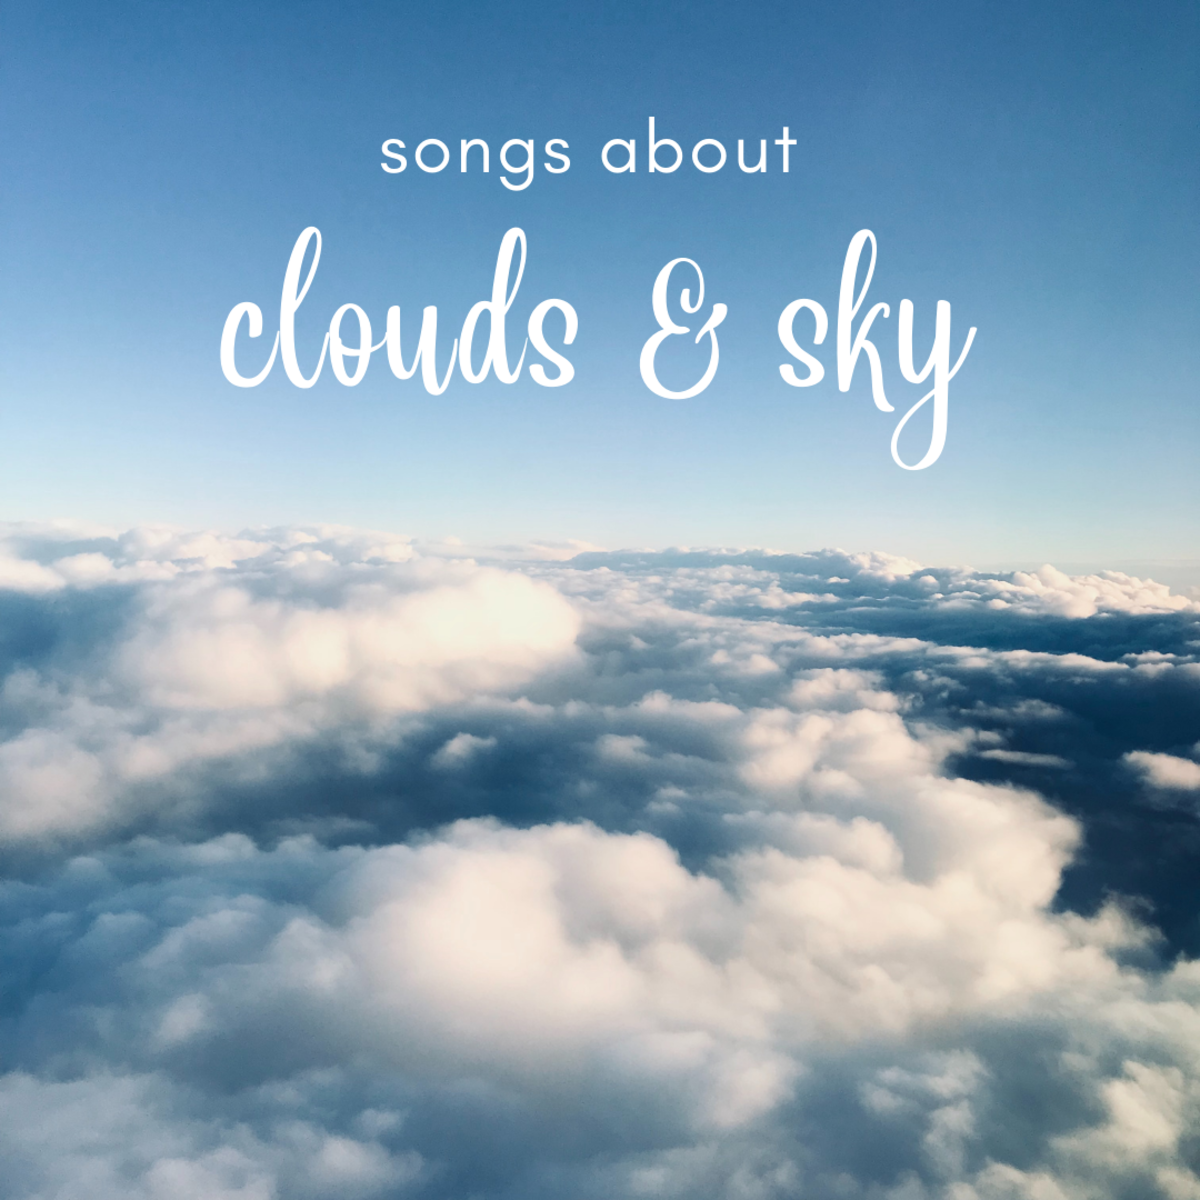 Make a playlist of pop, rock, and country songs about clouds and the sky.